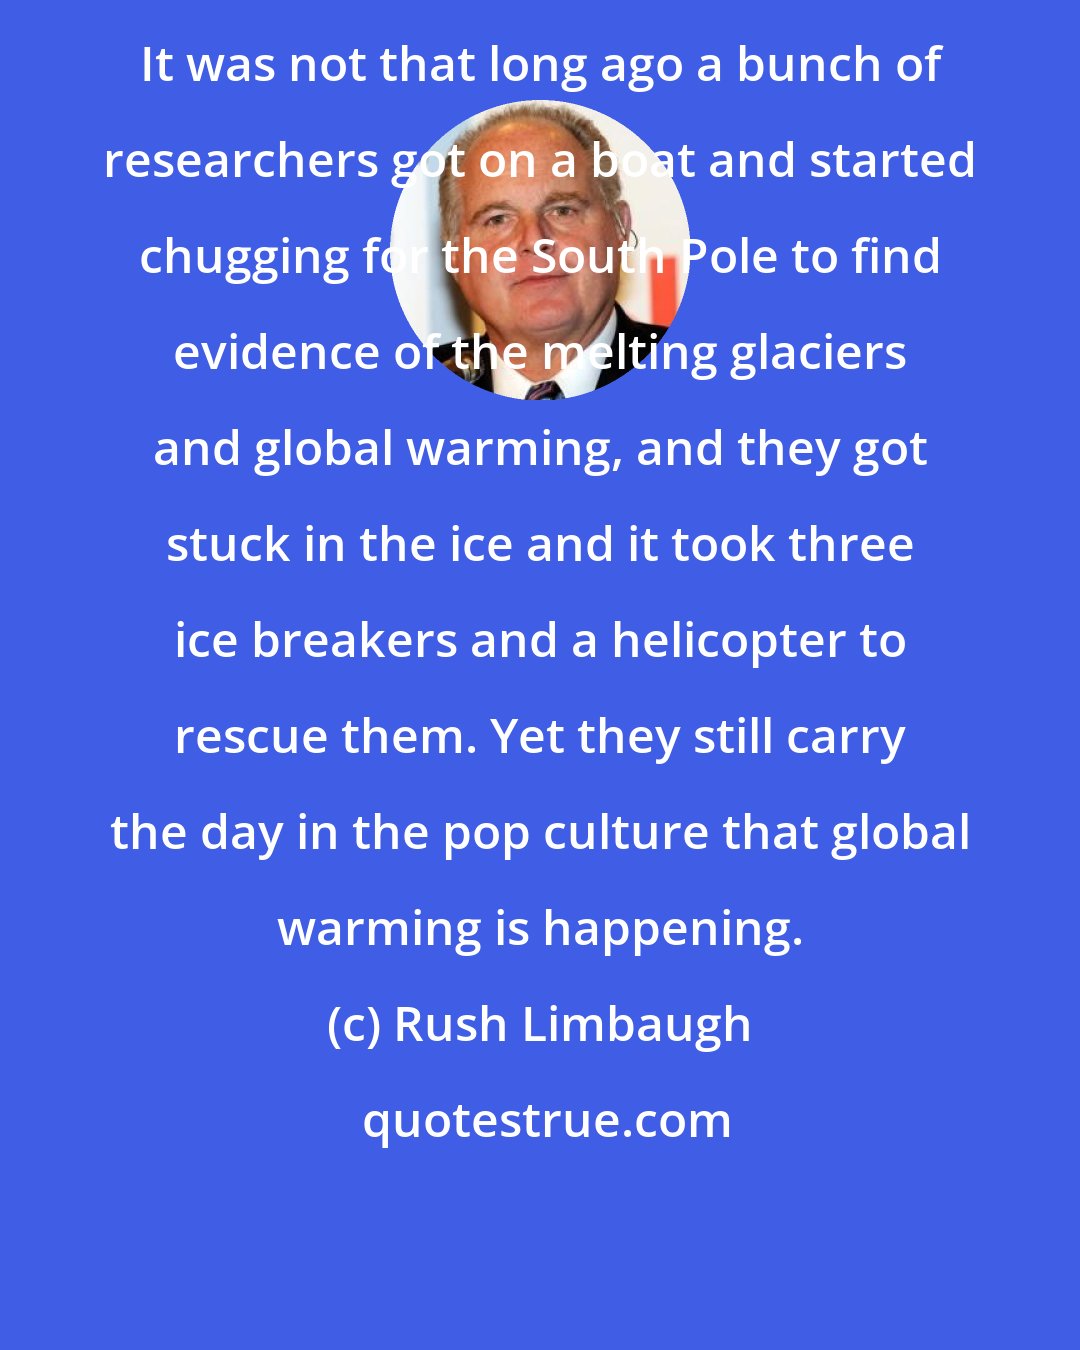 Rush Limbaugh: It was not that long ago a bunch of researchers got on a boat and started chugging for the South Pole to find evidence of the melting glaciers and global warming, and they got stuck in the ice and it took three ice breakers and a helicopter to rescue them. Yet they still carry the day in the pop culture that global warming is happening.